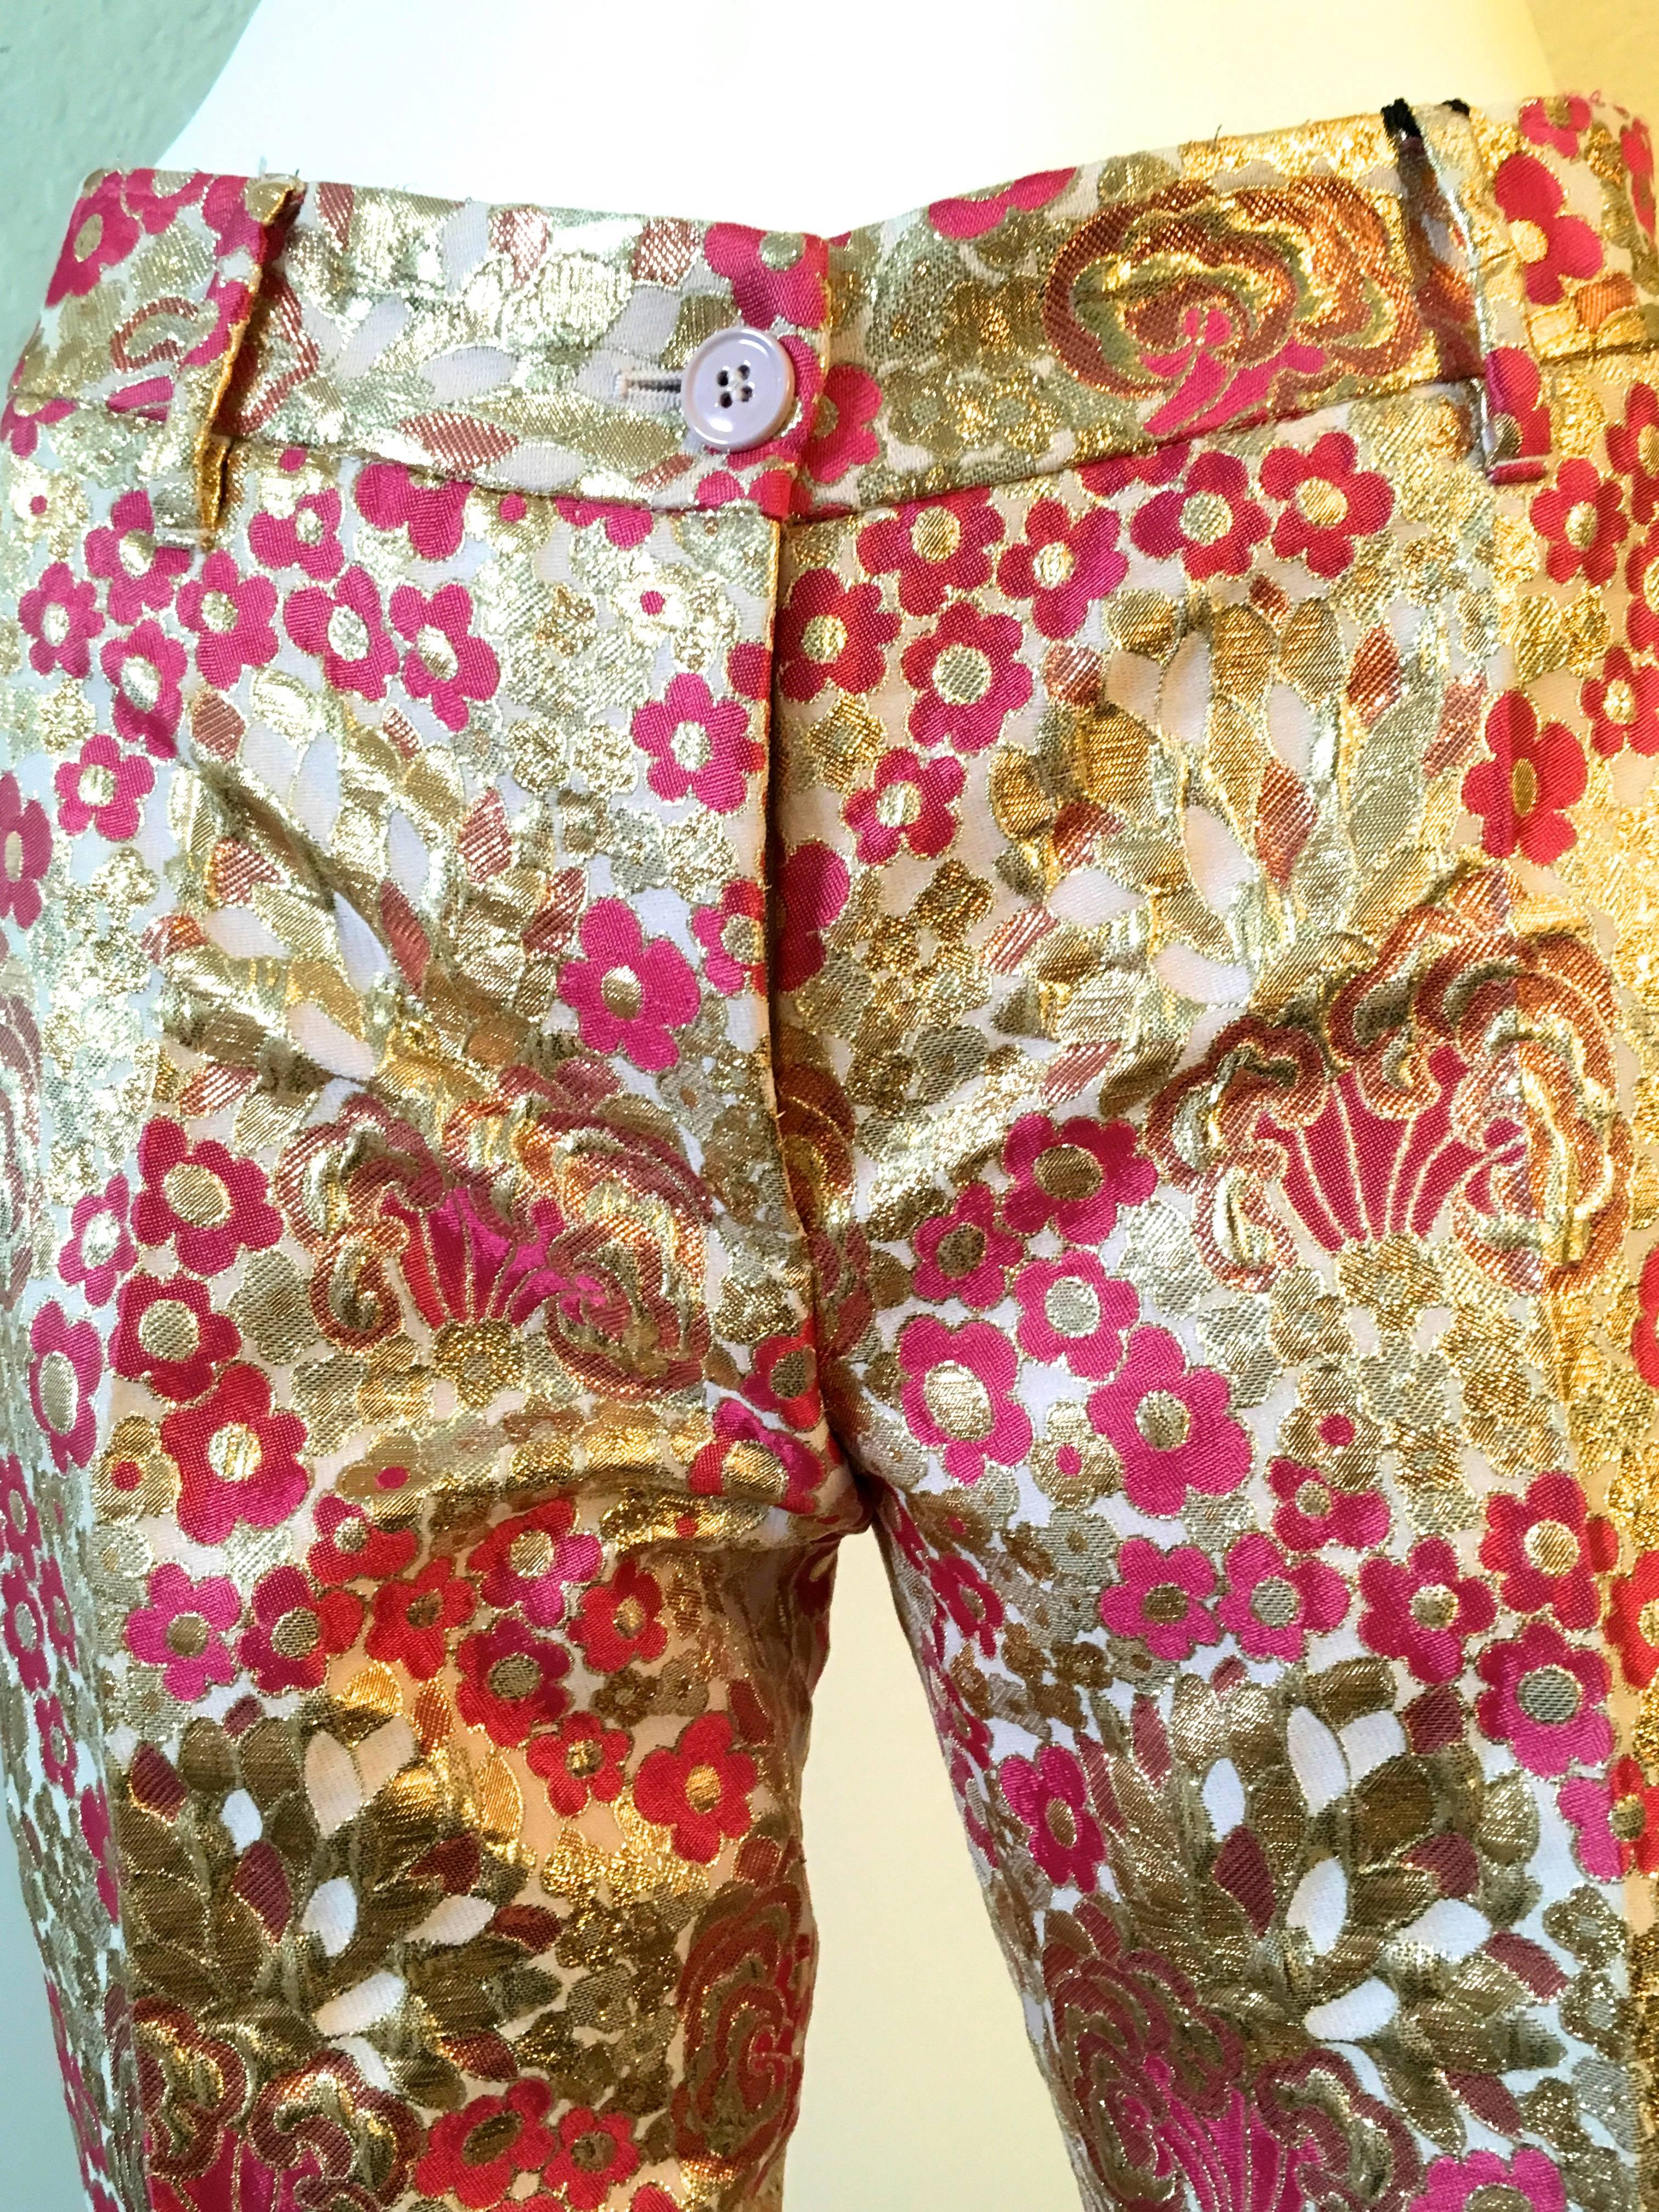 Presented here is a fabulous pair of Dolce and Gabbana pants. The stunning pair of pants is a size 38. The silk brocade fabric is absolutely magnificent and the fabric is woven threads of gold and light pink and magenta flowers throughout. A